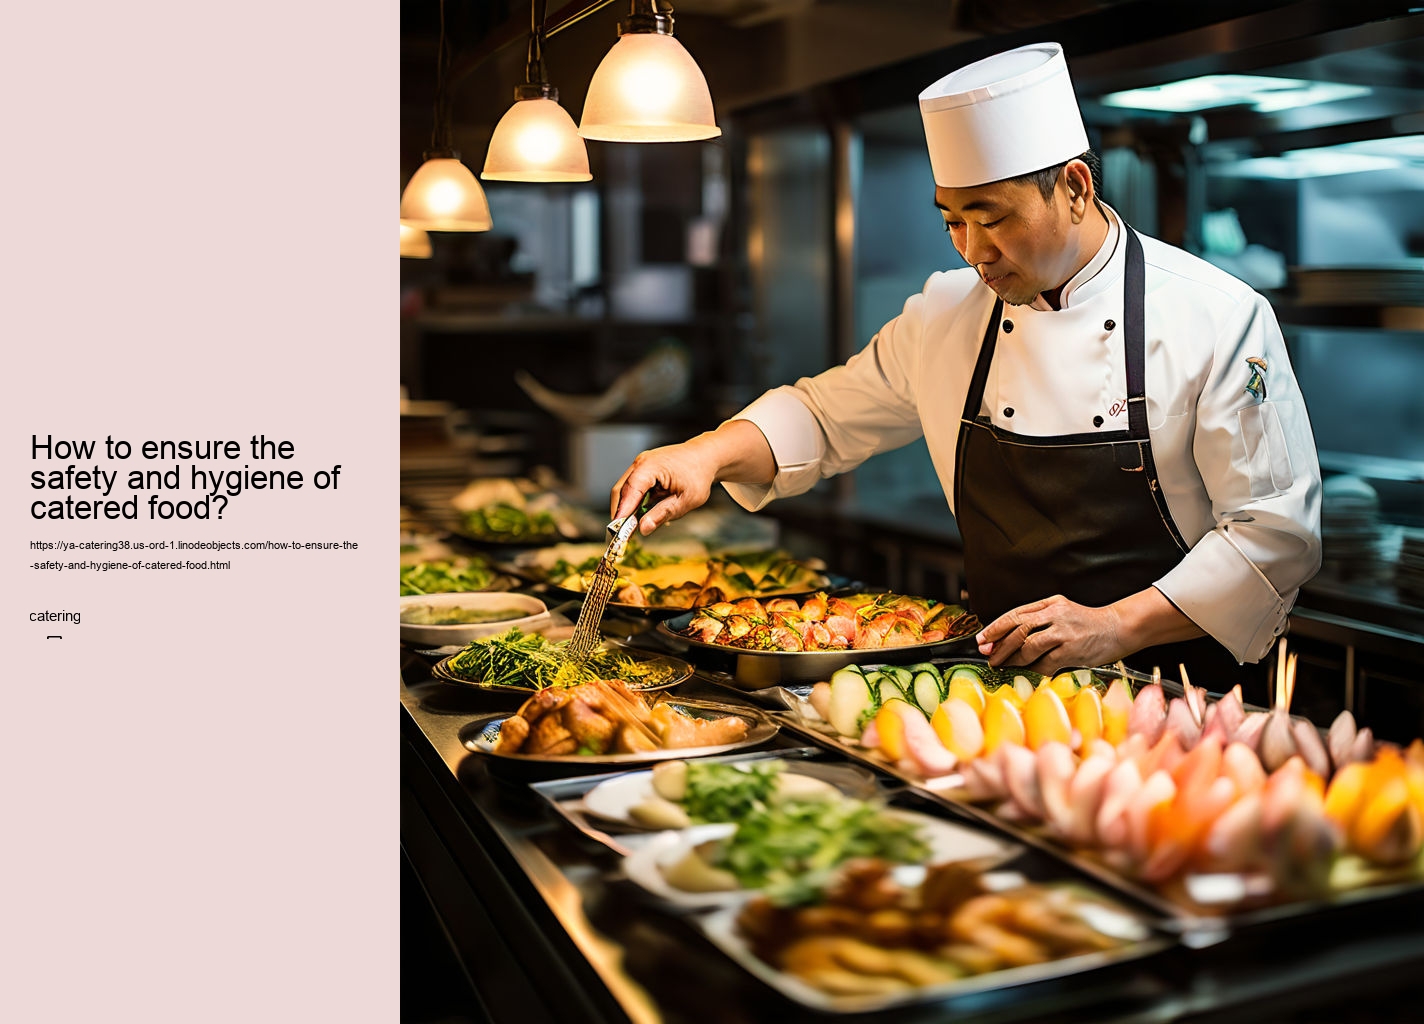 How to ensure the safety and hygiene of catered food?